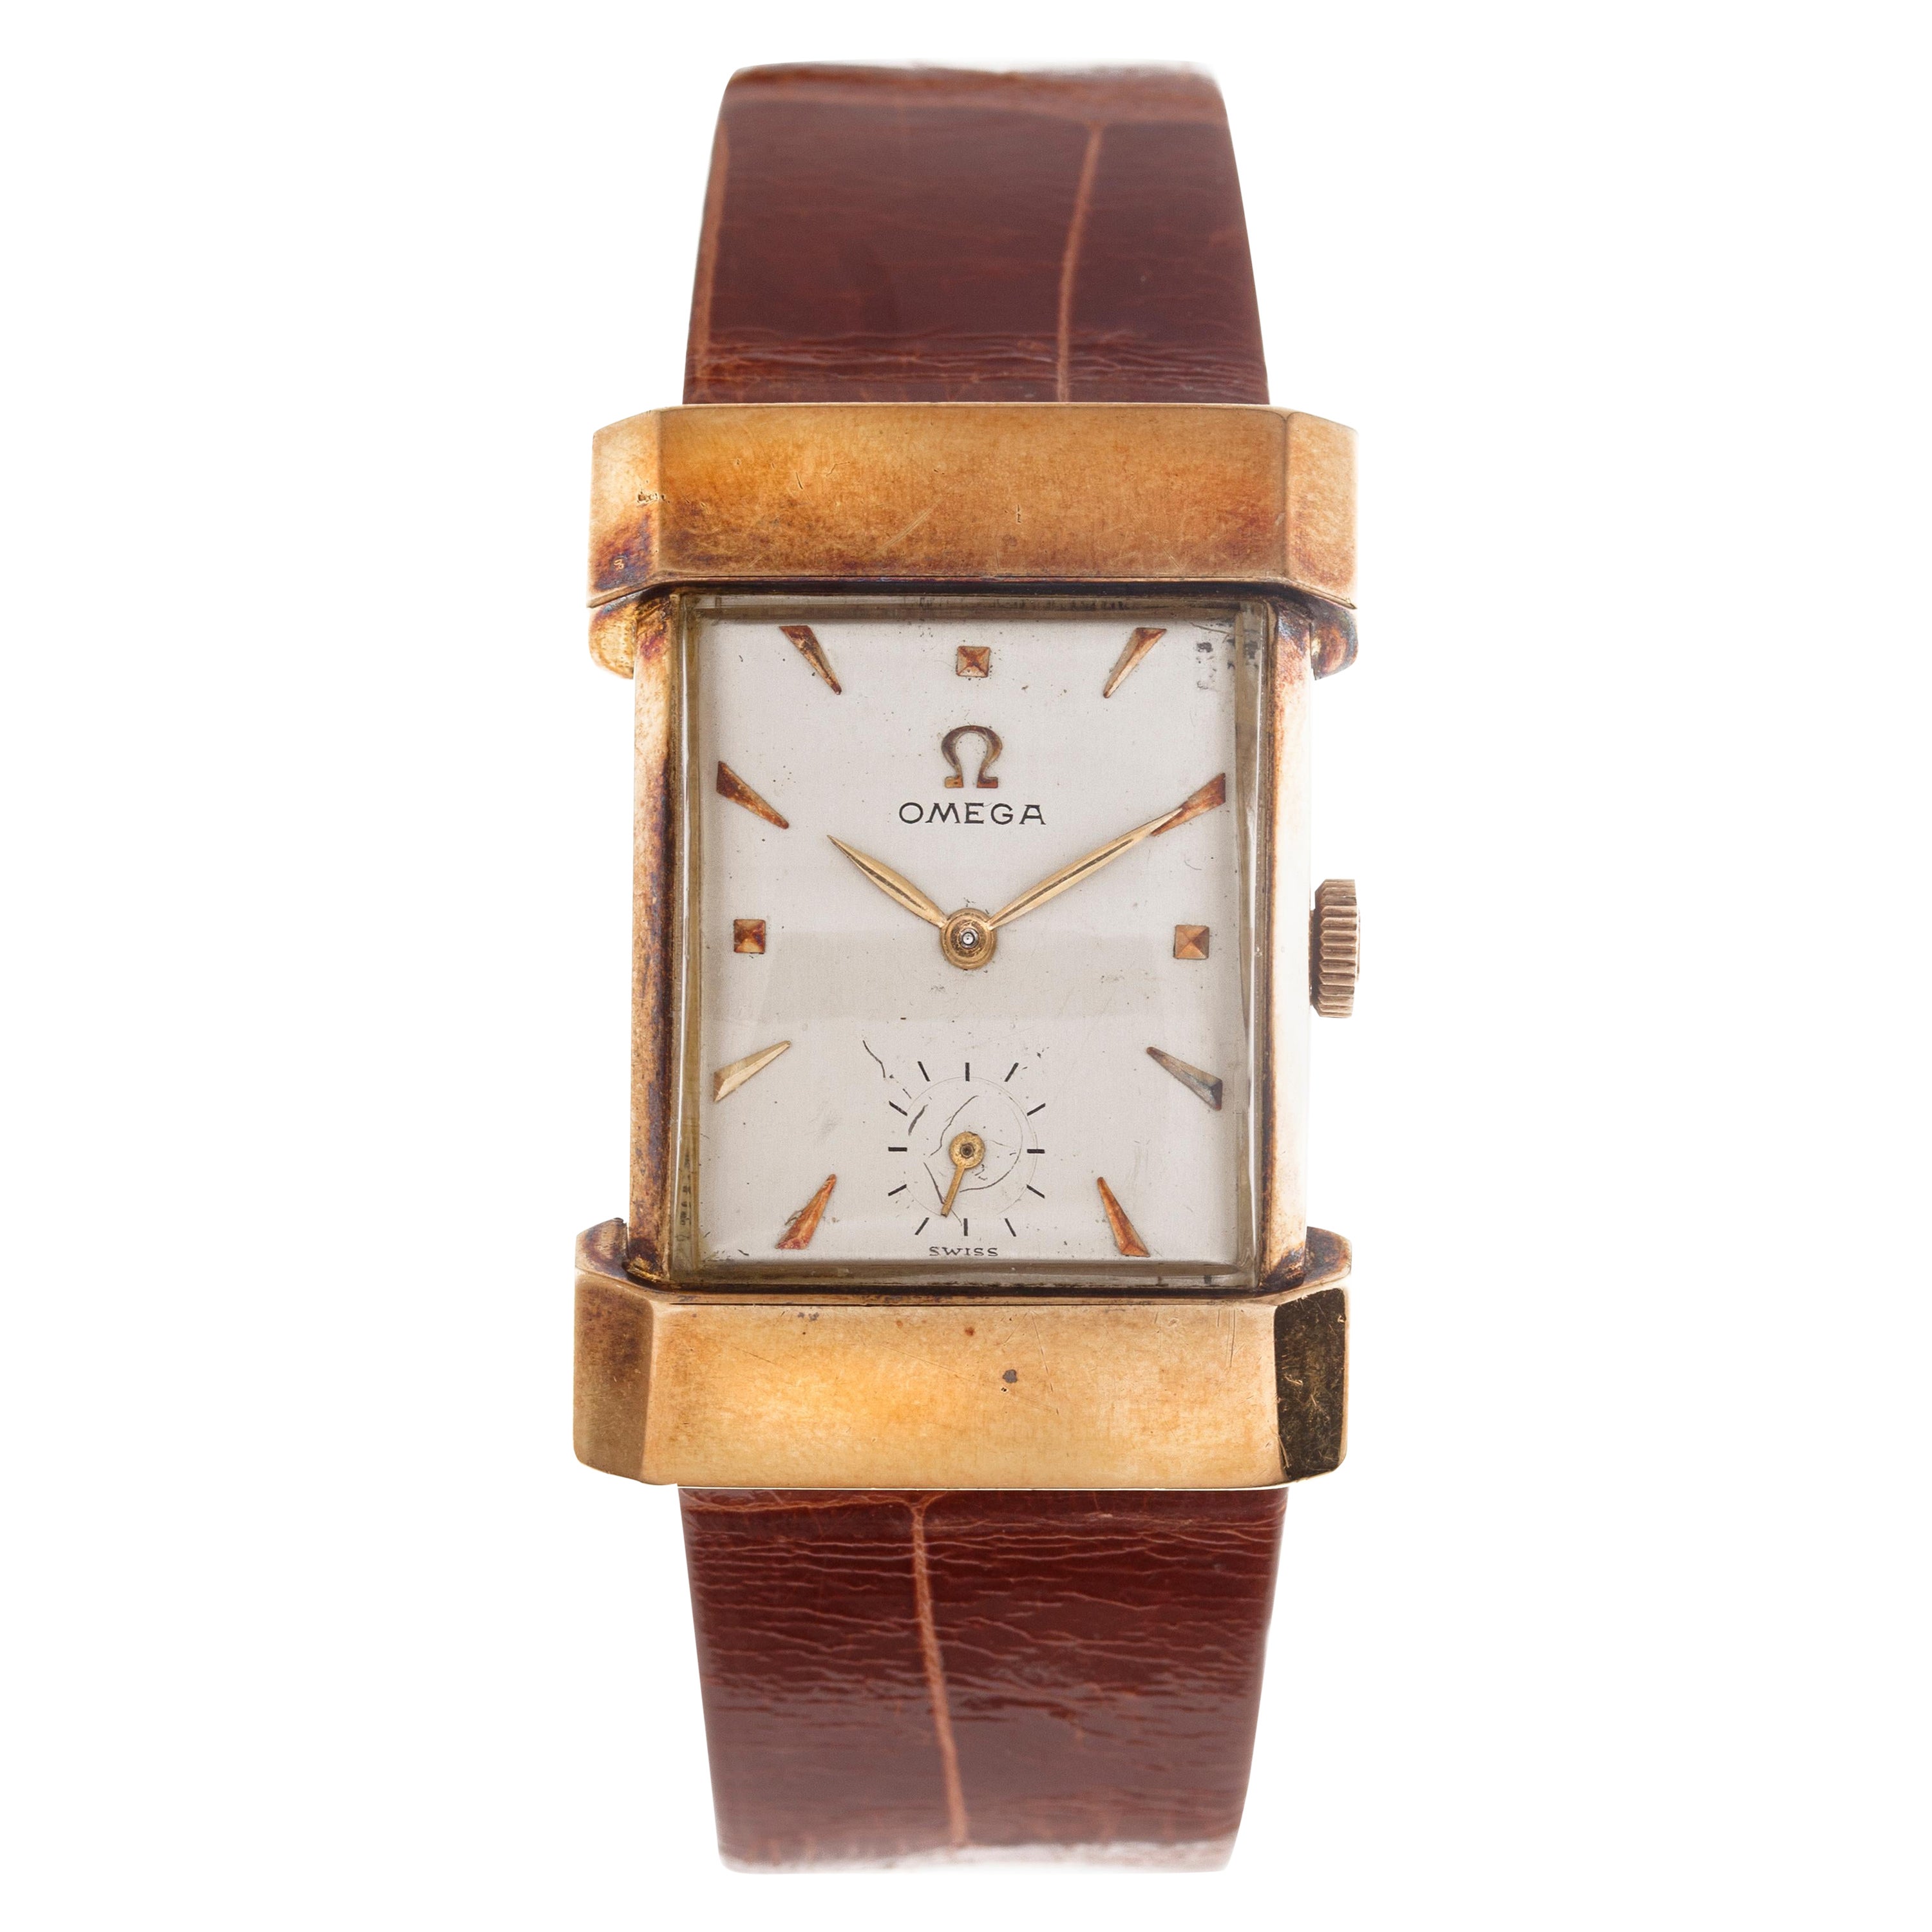 Omega Wrist Watch "Cinesino" Squared Shaped 18 Carat Yellow Gold White Dial For Sale